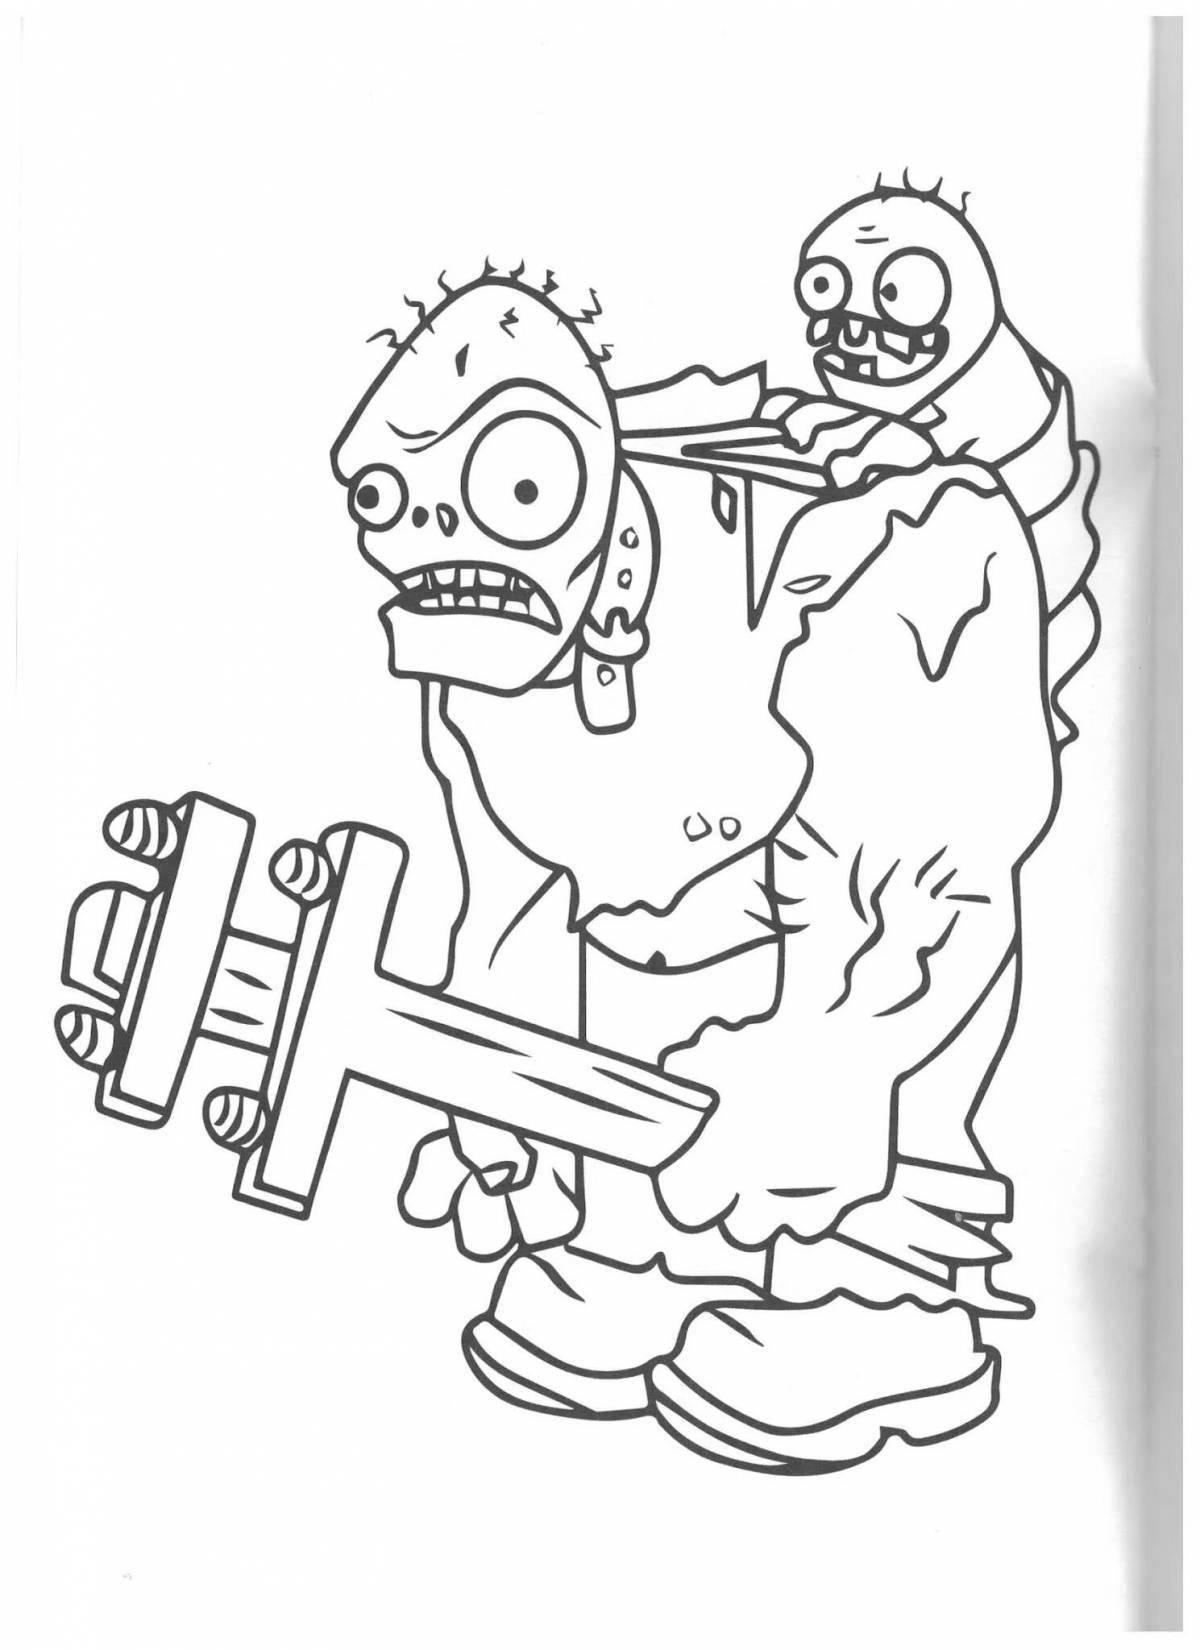 Coloring pages of plants vs zombies